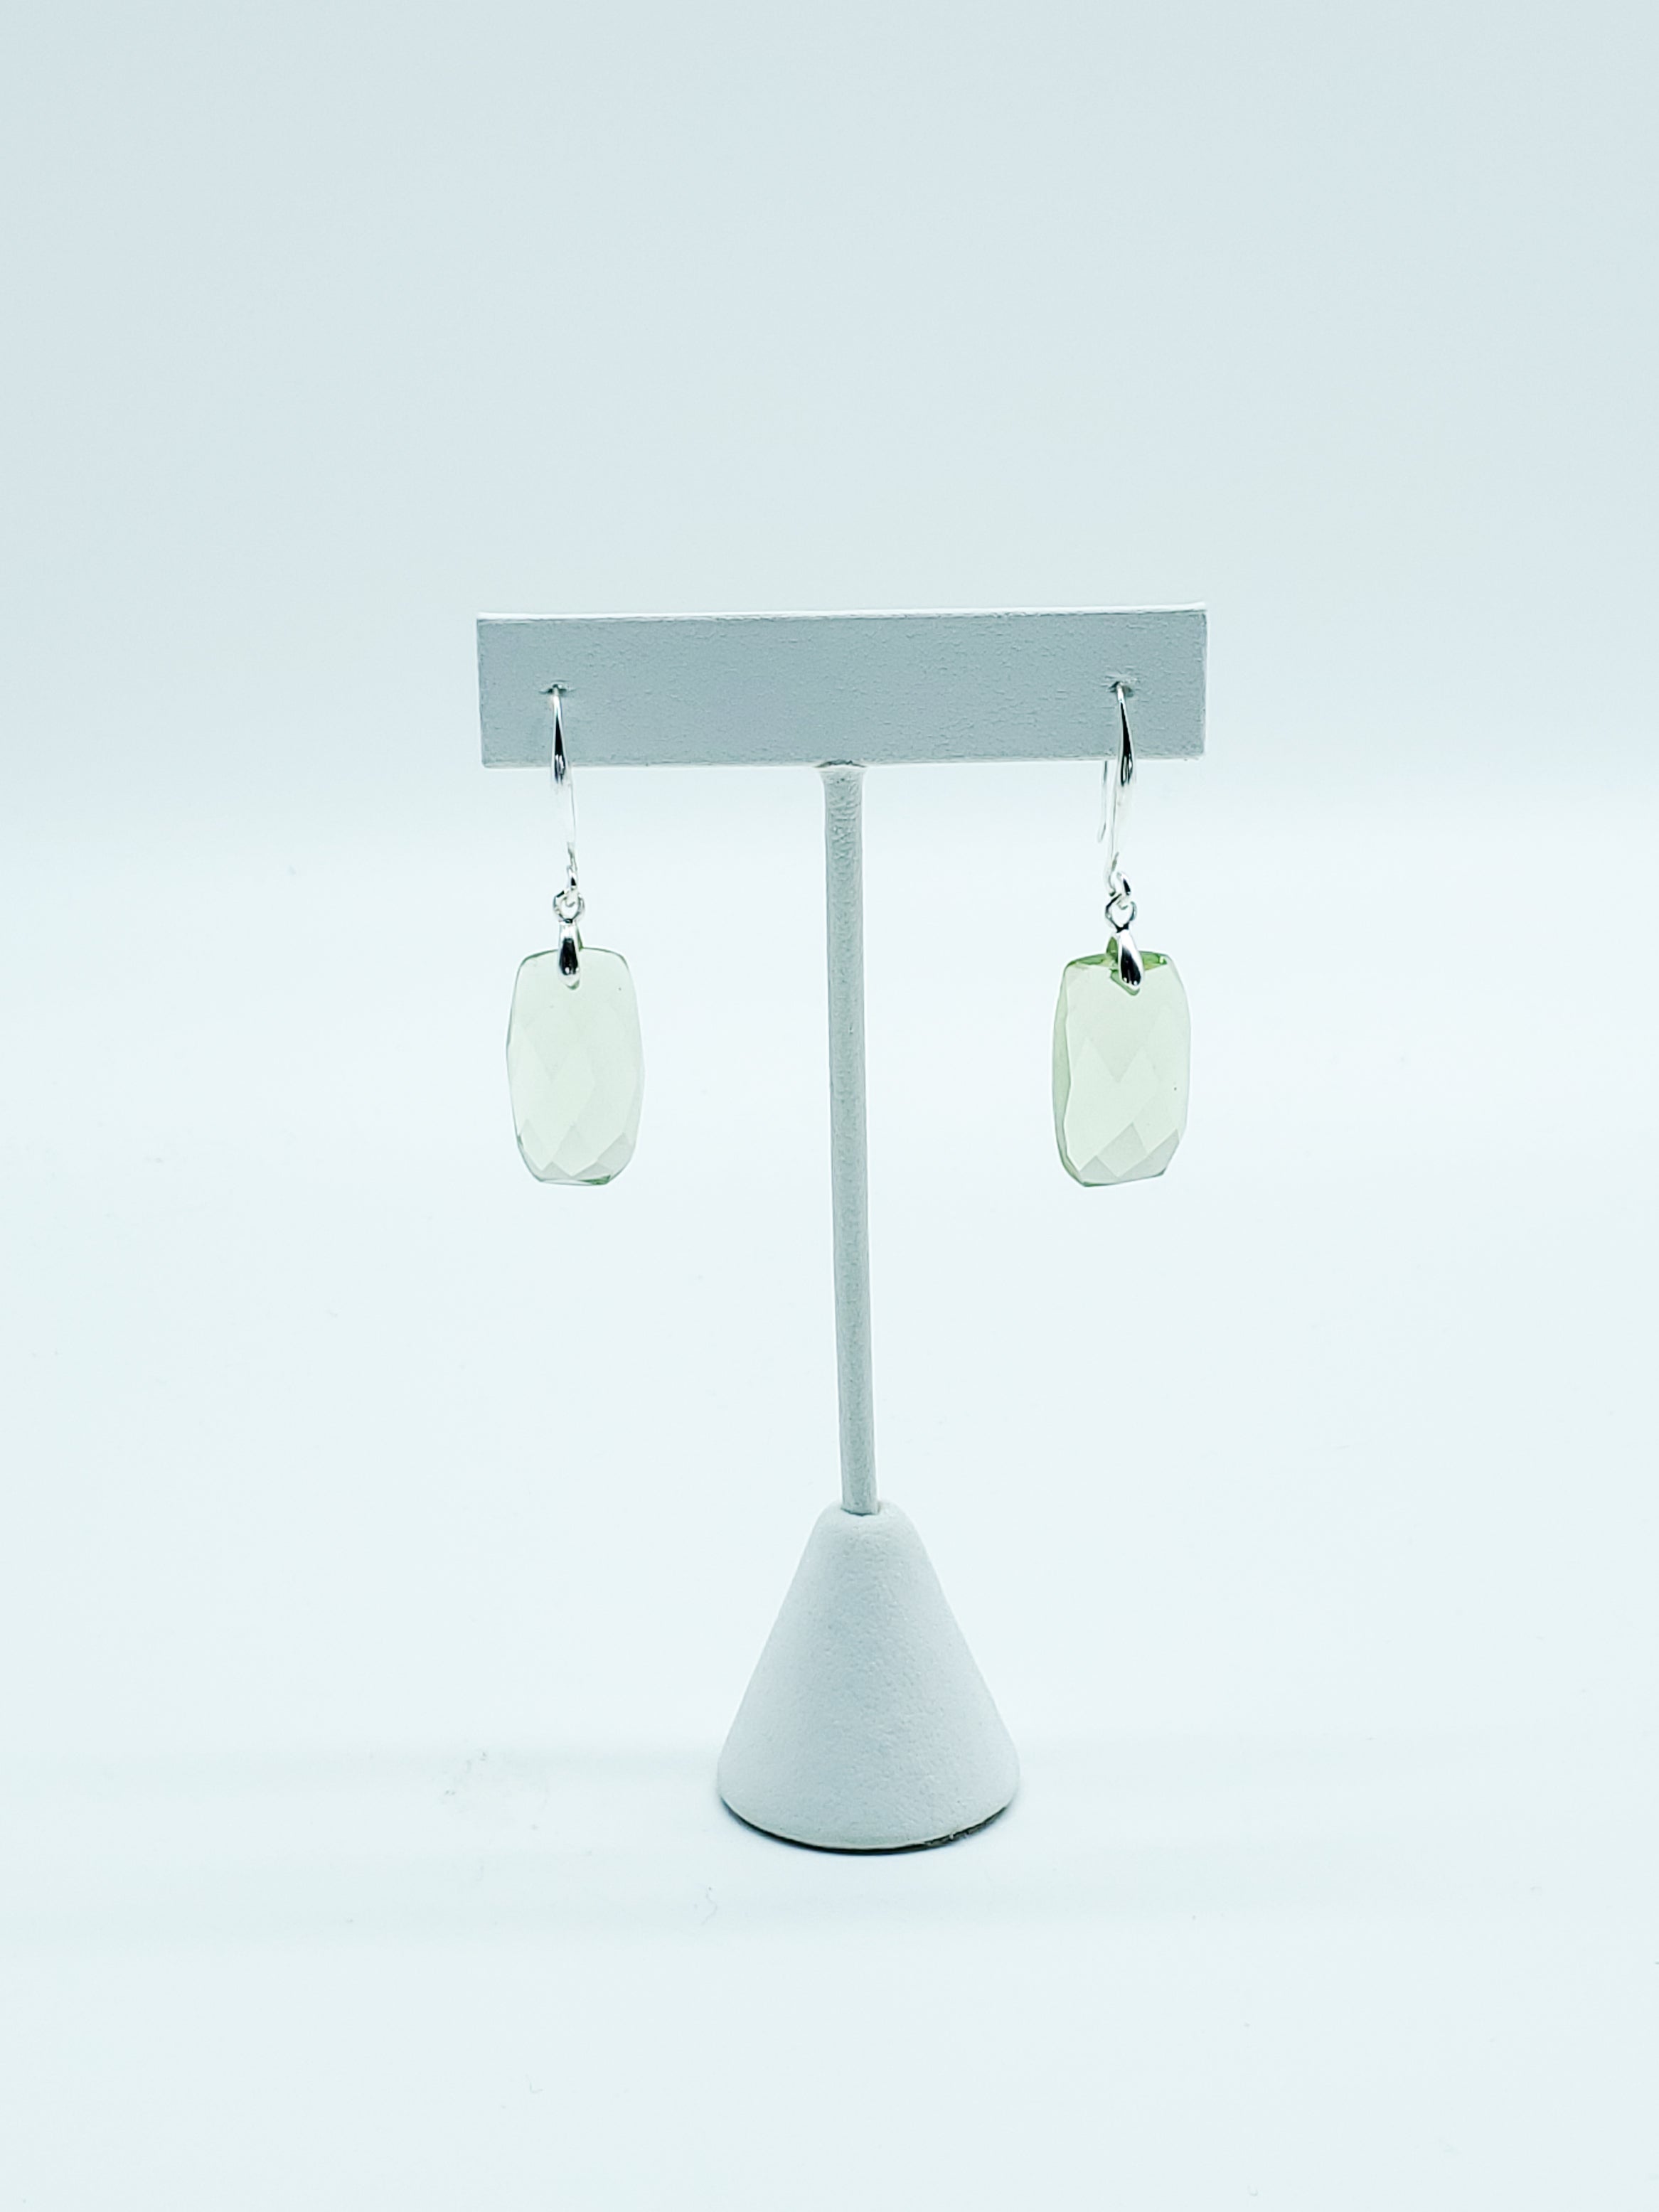 Bagette Faceted Hydro Peridot Quartz Earrings on Sterling Silver Ear Wires - The Caffeinated Raven